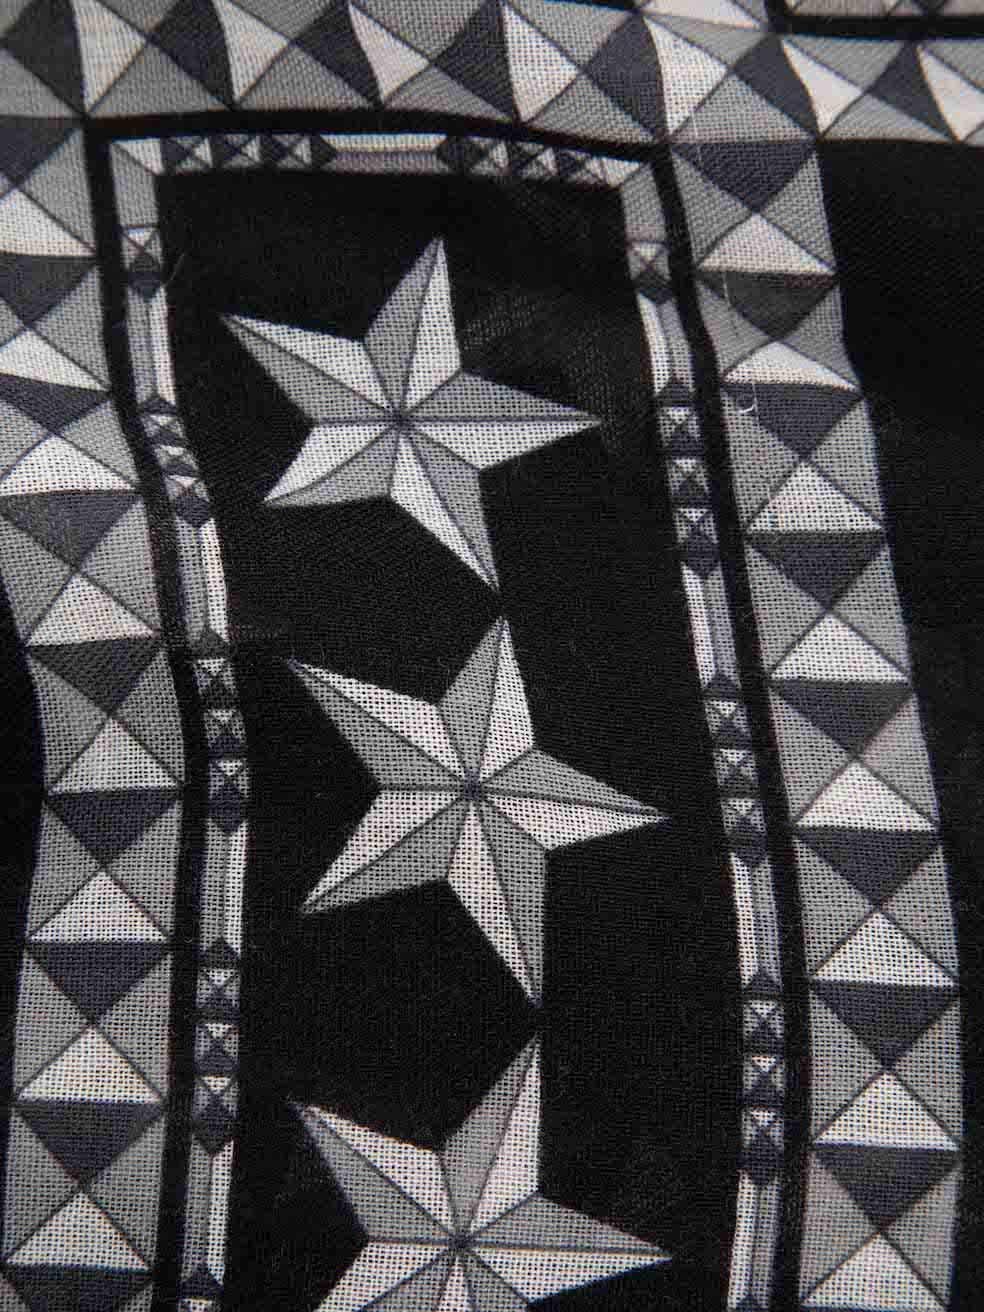 Givenchy Black Star Print Scarf In Excellent Condition For Sale In London, GB